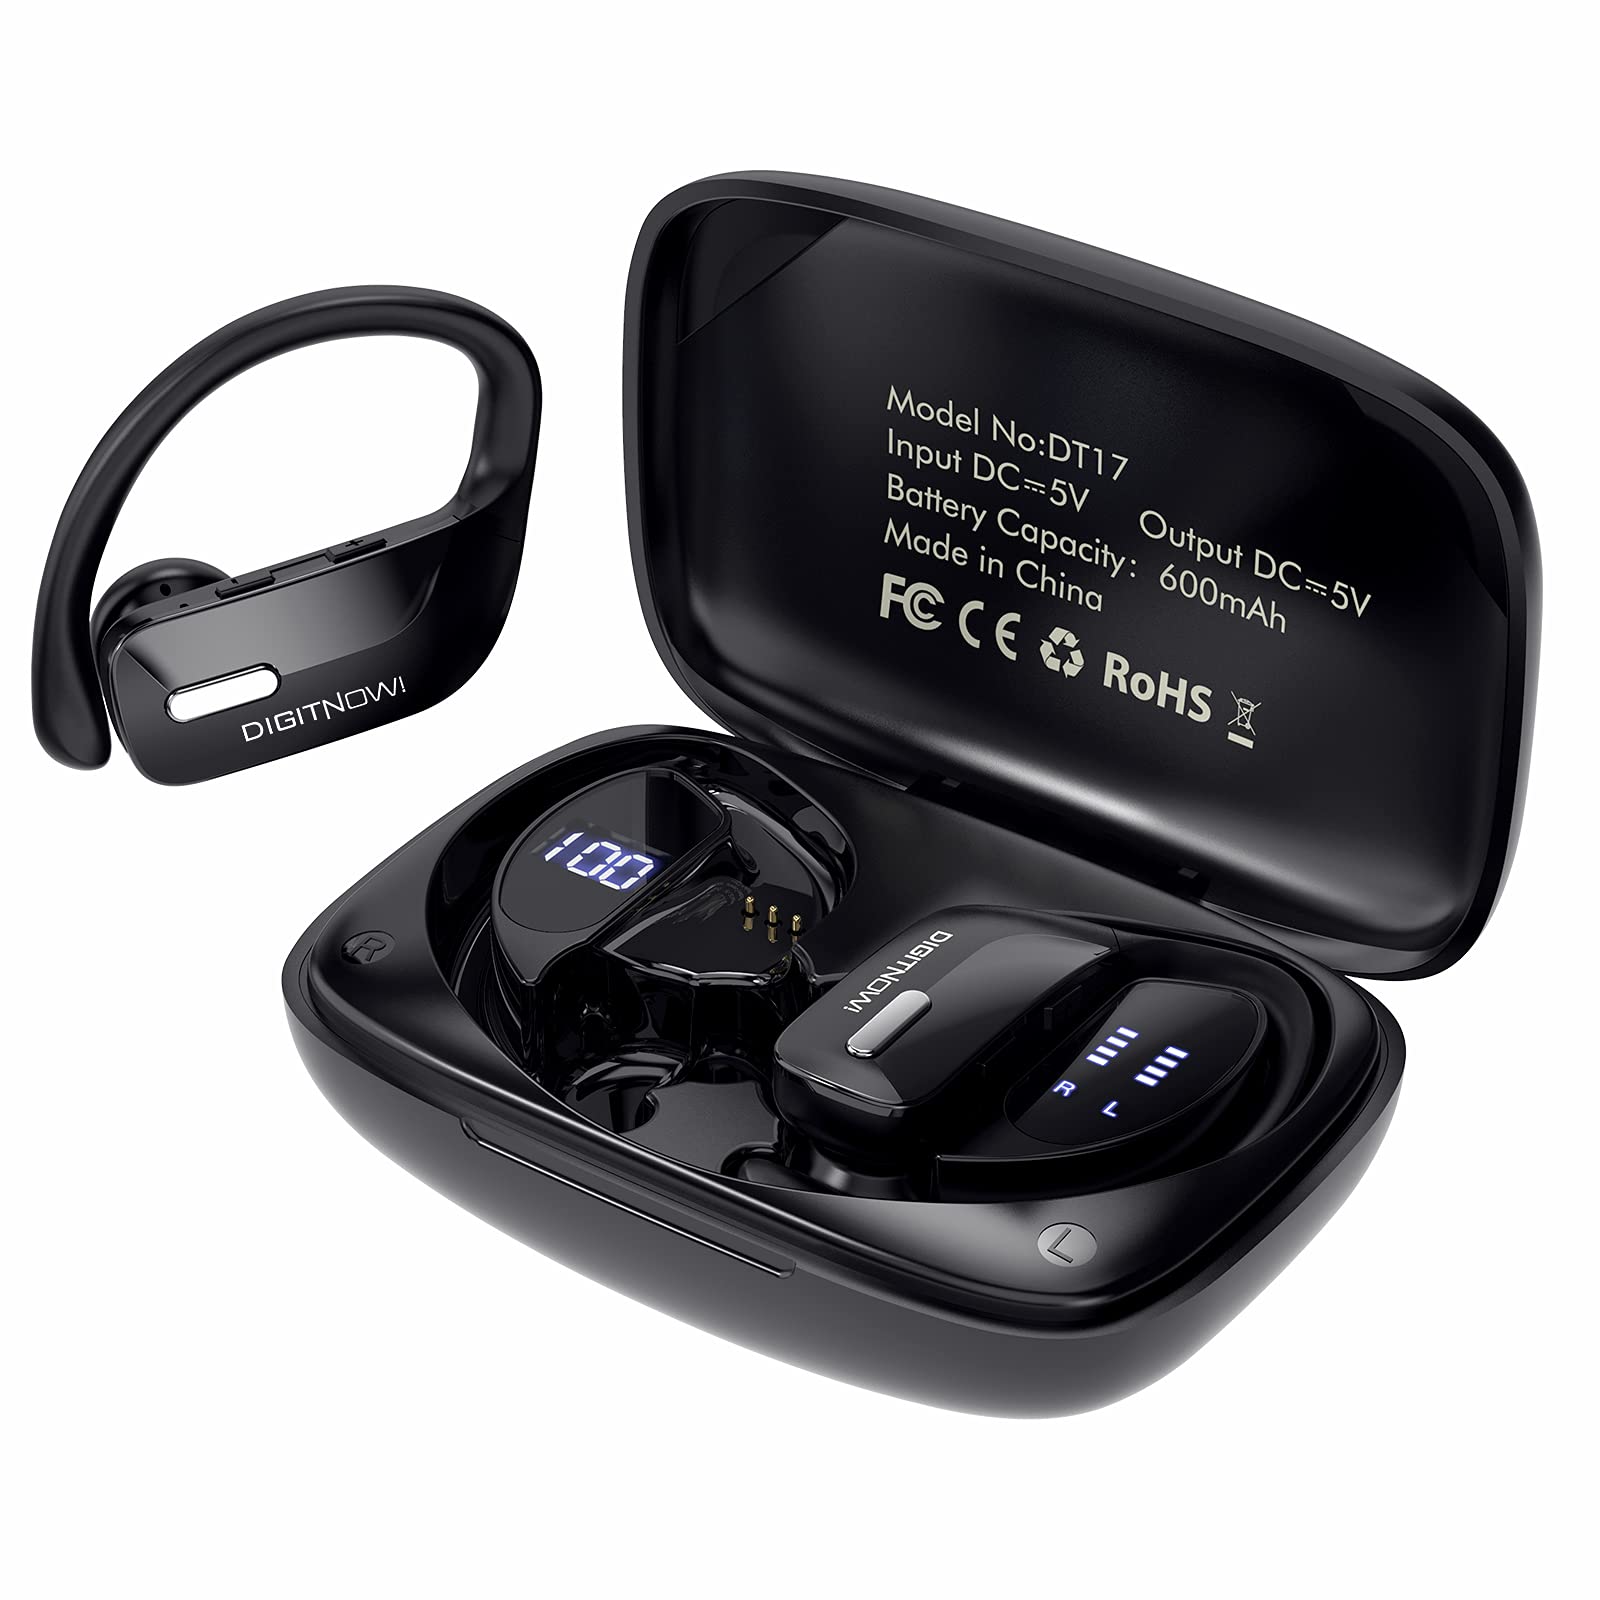 Wireless Earbuds Bluetooth LKLLL 5.0 Headphones 48 Hours Playback Sports Earphones with LED Display Built-in Mic Deep Bass Stereo In-Ear Waterproof Earphones for Exercise Game Running